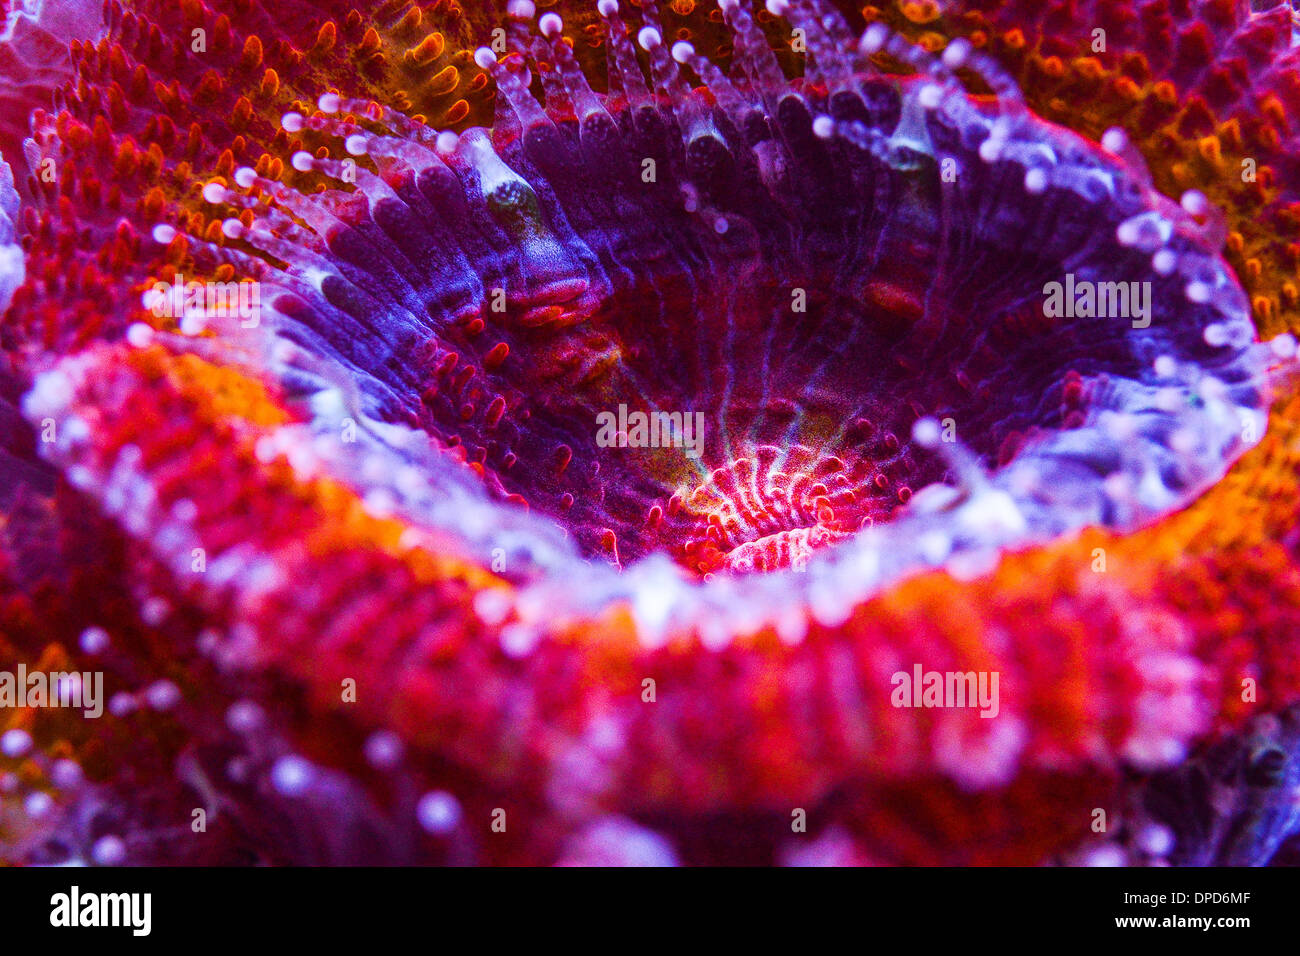 Bamberg, Germany. 12th Jan, 2014. A colorful stony coral (scleratinia) of the species 'Acanthastrea rainbow' tries to catch plankton with its polyps in a private reef aquarium in Bamberg, Germany, 12 January 2014. Photo: David Ebener/dpa/Alamy Live News Stock Photo